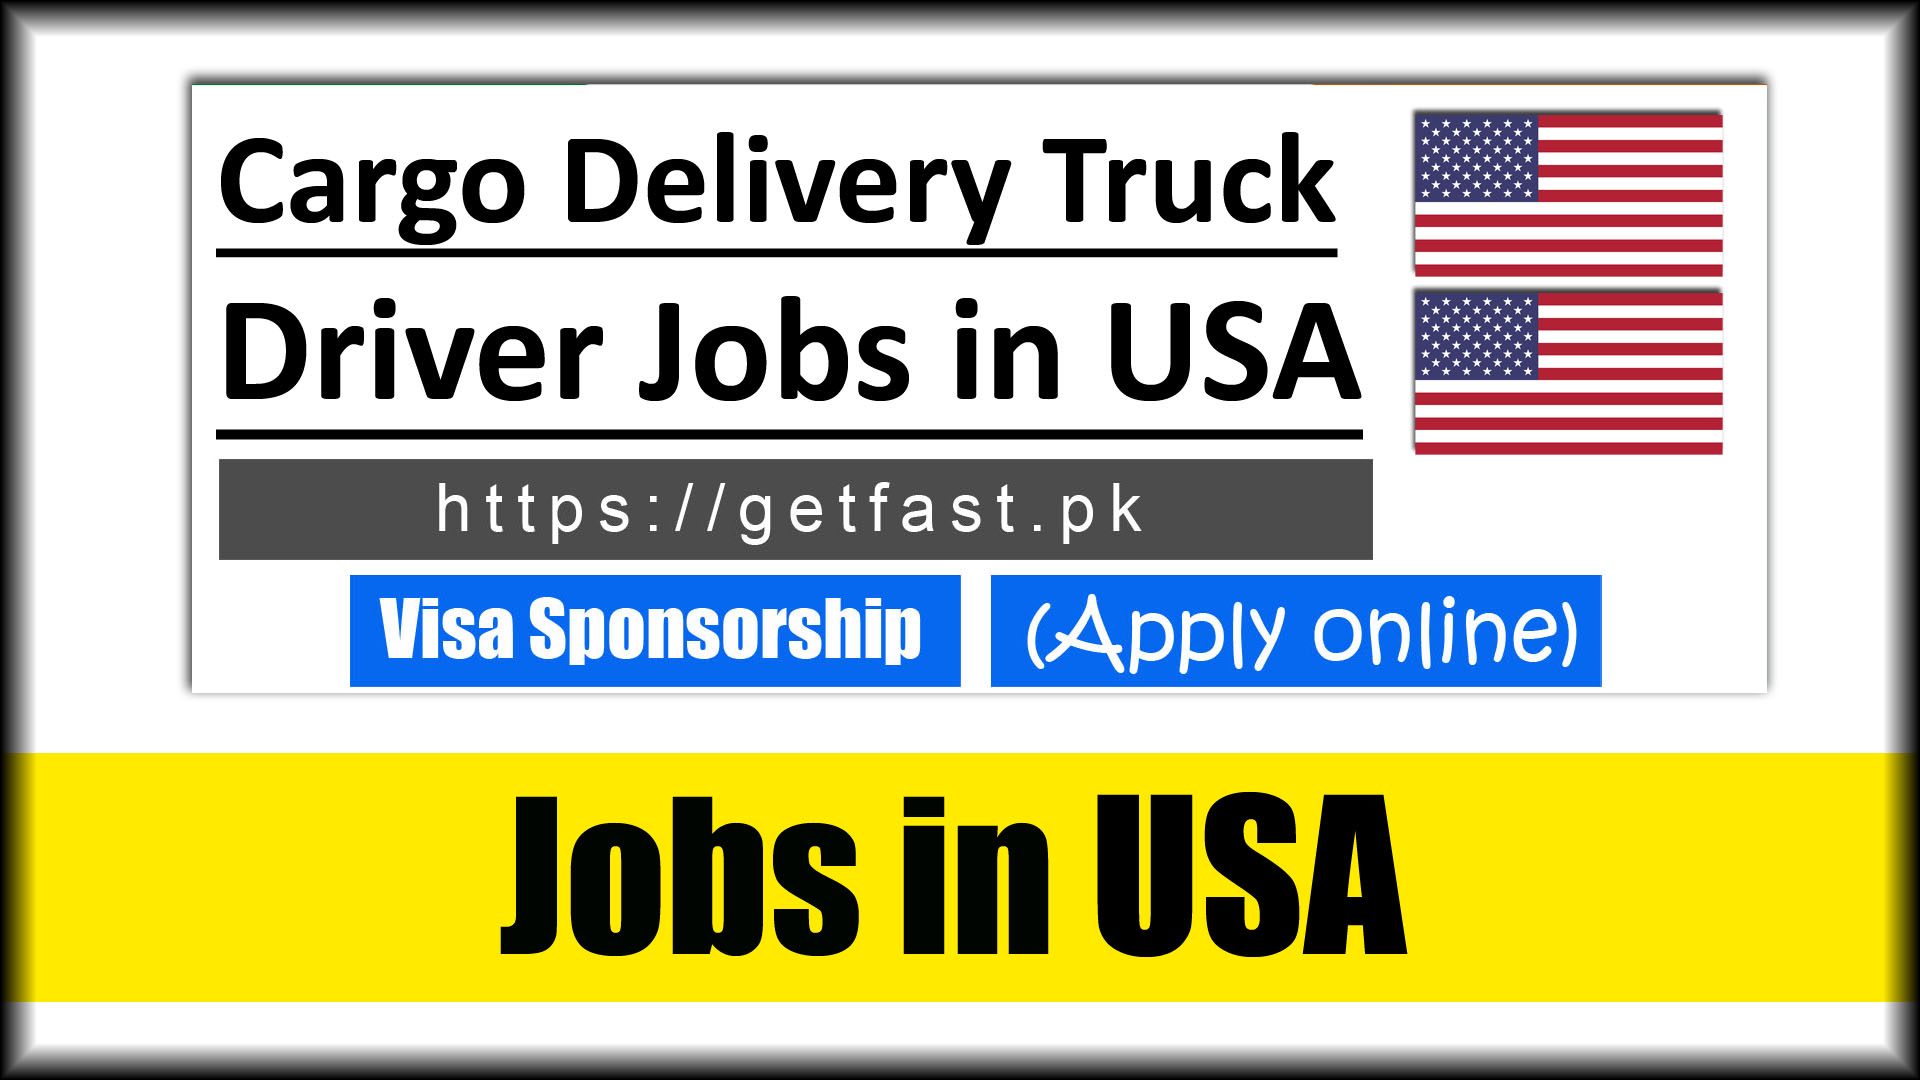 Cargo Delivery Truck Driver Jobs